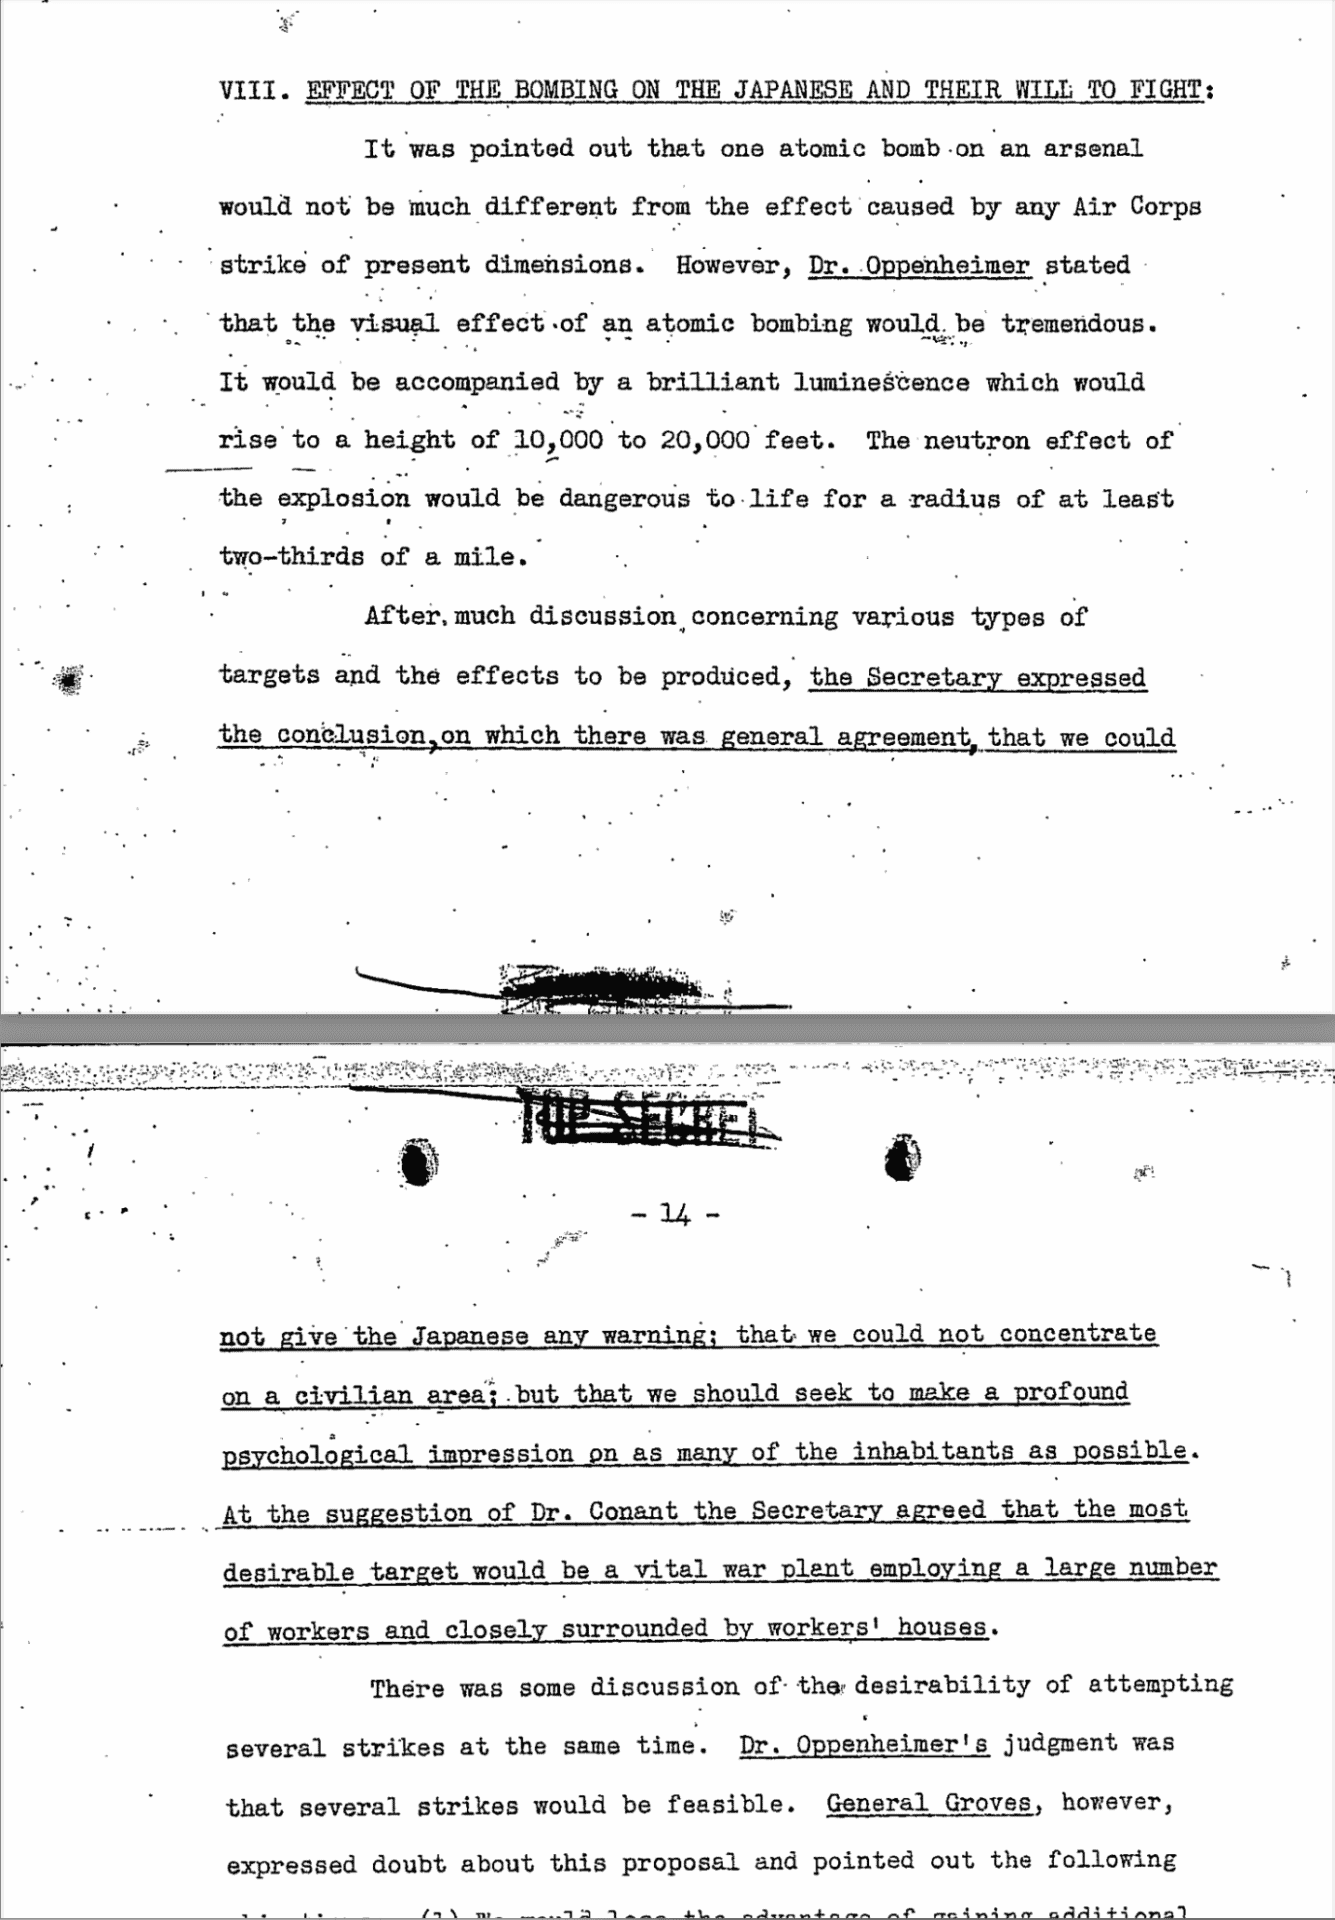 Screenshot of pages 13 and 14 of the minutes of the meeting held among the US’ highest scientific and government officials on May 31, 1945 to discuss whether or not to drop atomic bombs on Japan. The notes of this Top Secret meeting were declassified after several decades had passed, and they and other items are readily available to the public at places such as George Washington University’s National Security Archive, which maintains a briefing book and a “Collection of Primary Sources” regarding the atomic bombings. The minutes of this particular meeting can be downloaded in their entirety from the <a href="https://nsarchive2.gwu.edu//NSAEBB/NSAEBB162/12.pdf">National Security Archive</a>.